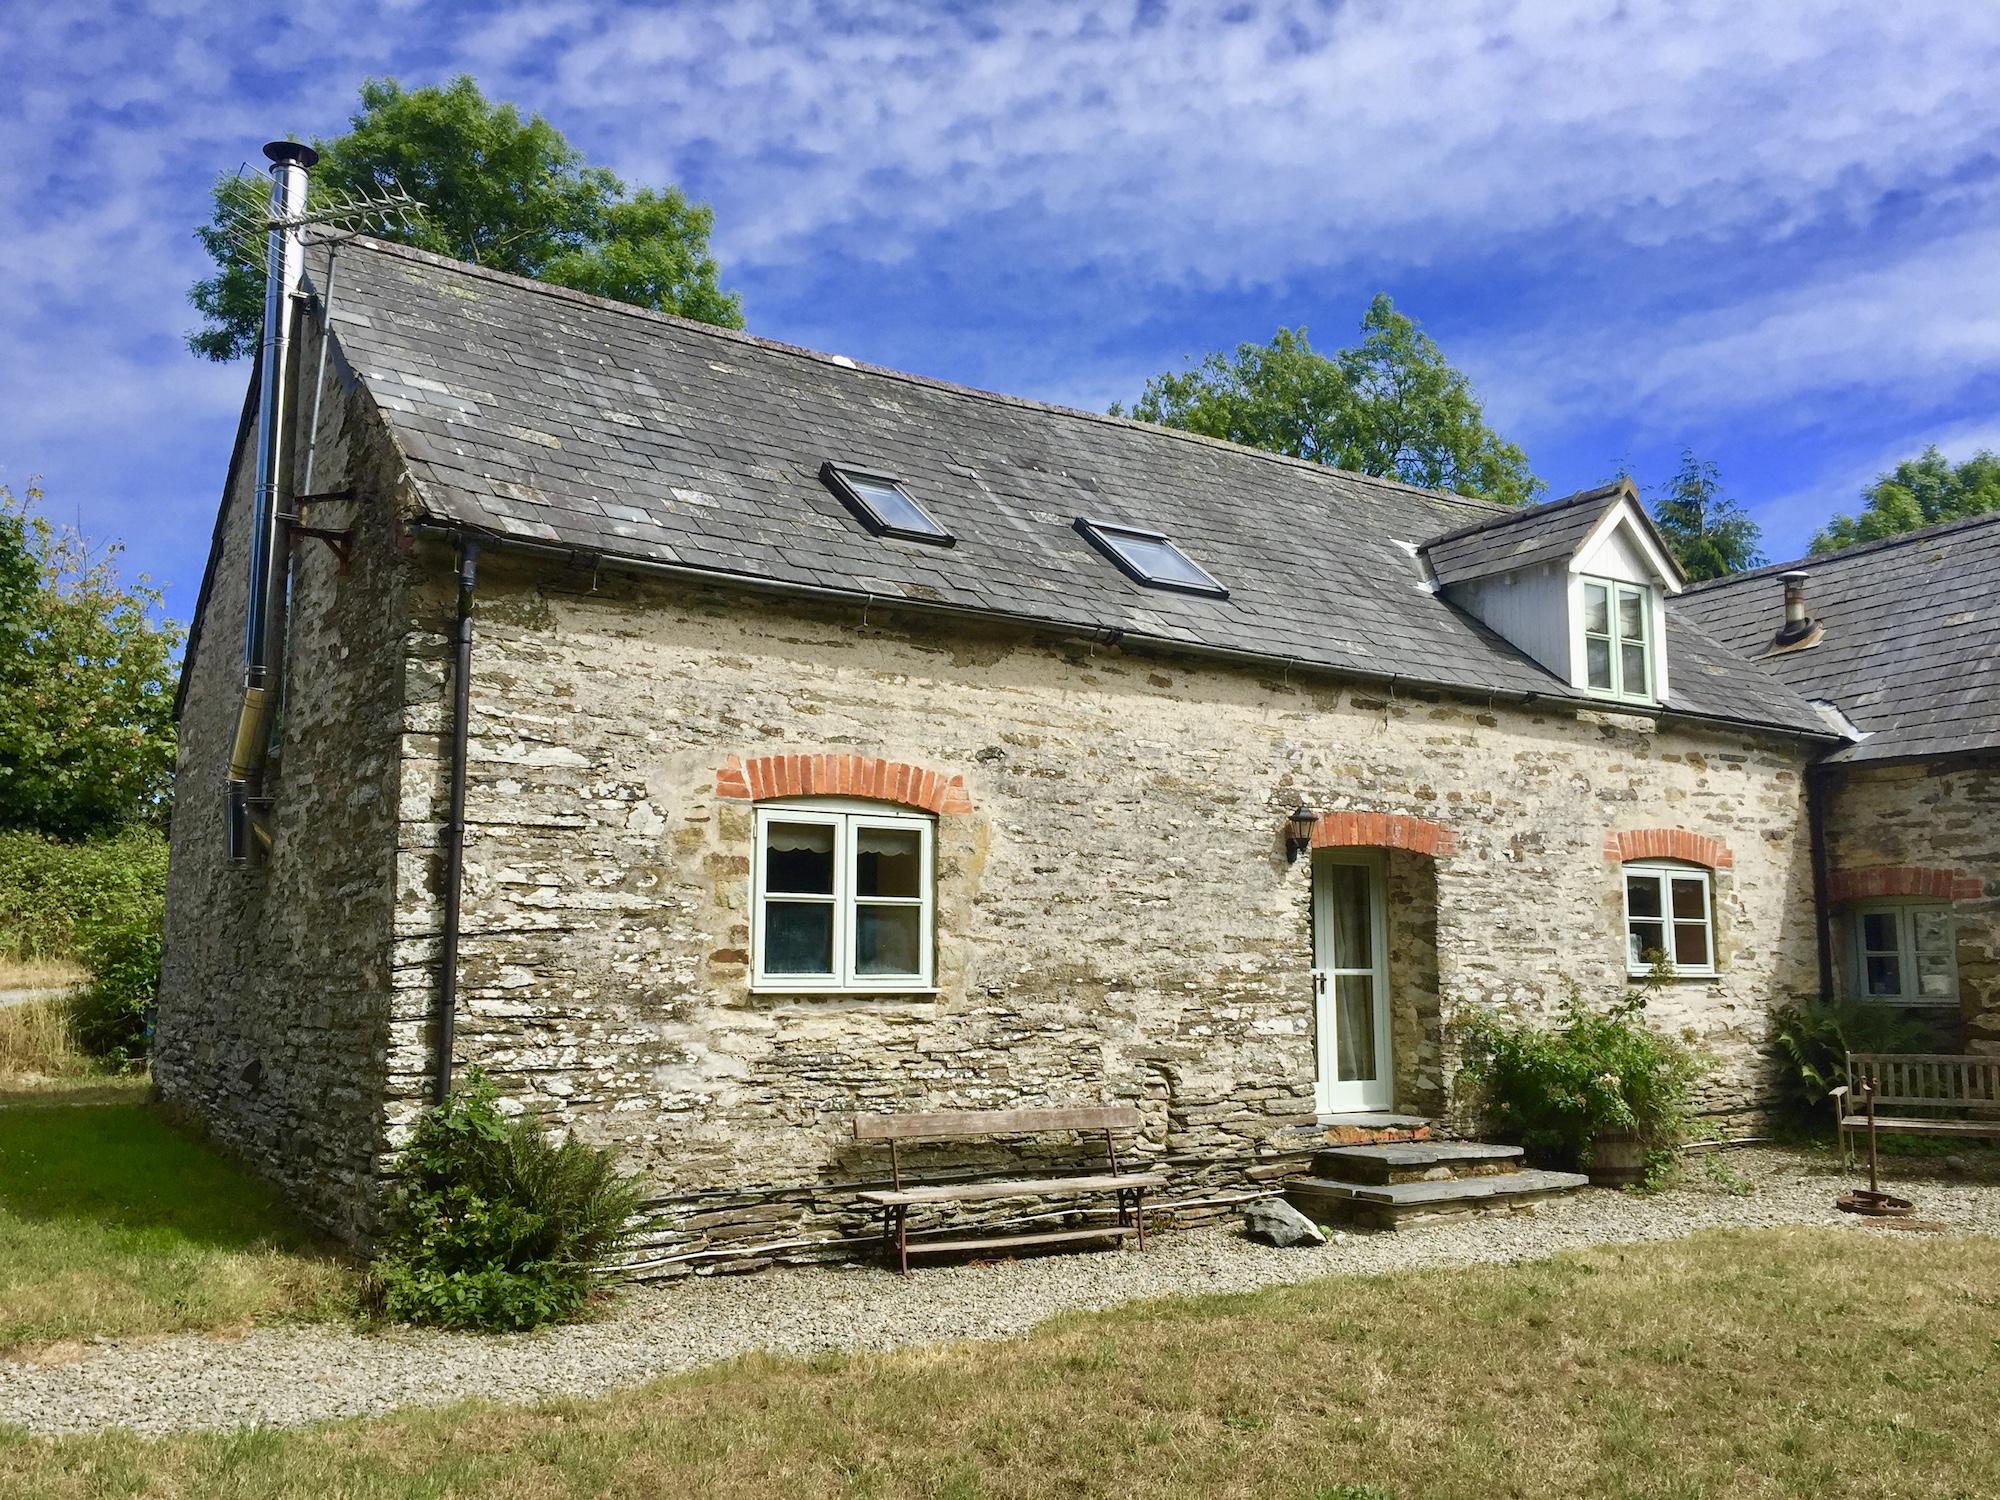 Self-Catering in Ceredigion holidays at Cool Places